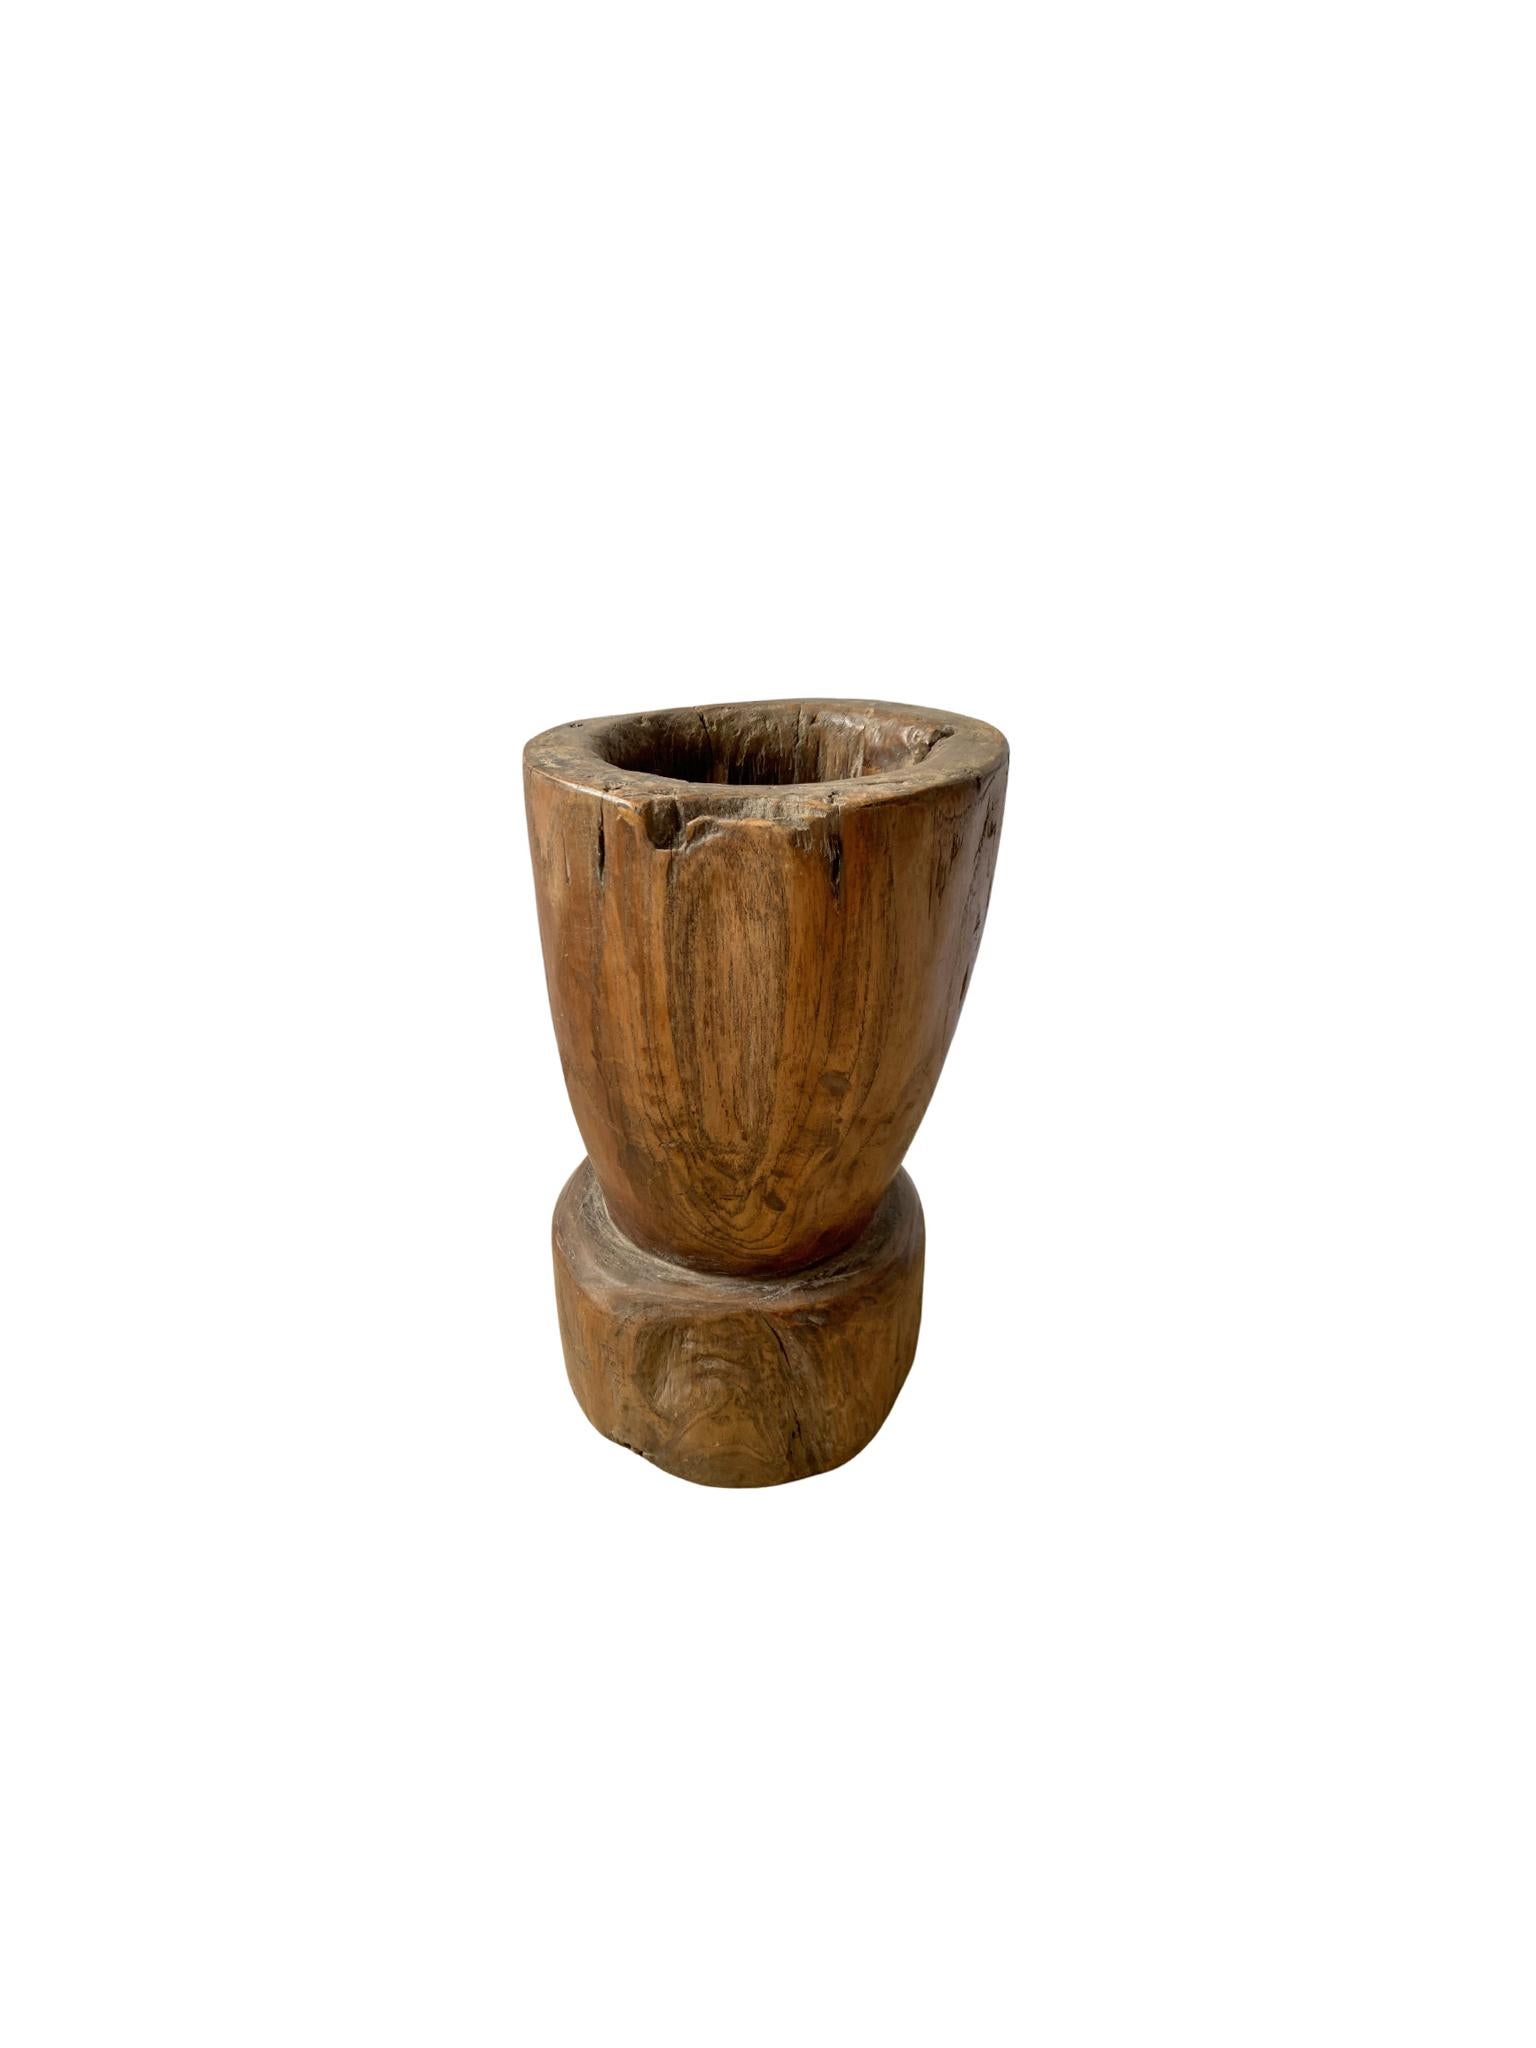 A vintage mortar bowl soured from rural Java & crafted from a solid teak wood slab. A raw and organic object with beautiful wood textures and imperfections. A versatile decorative object to bring warmth and life to any space, despite its once